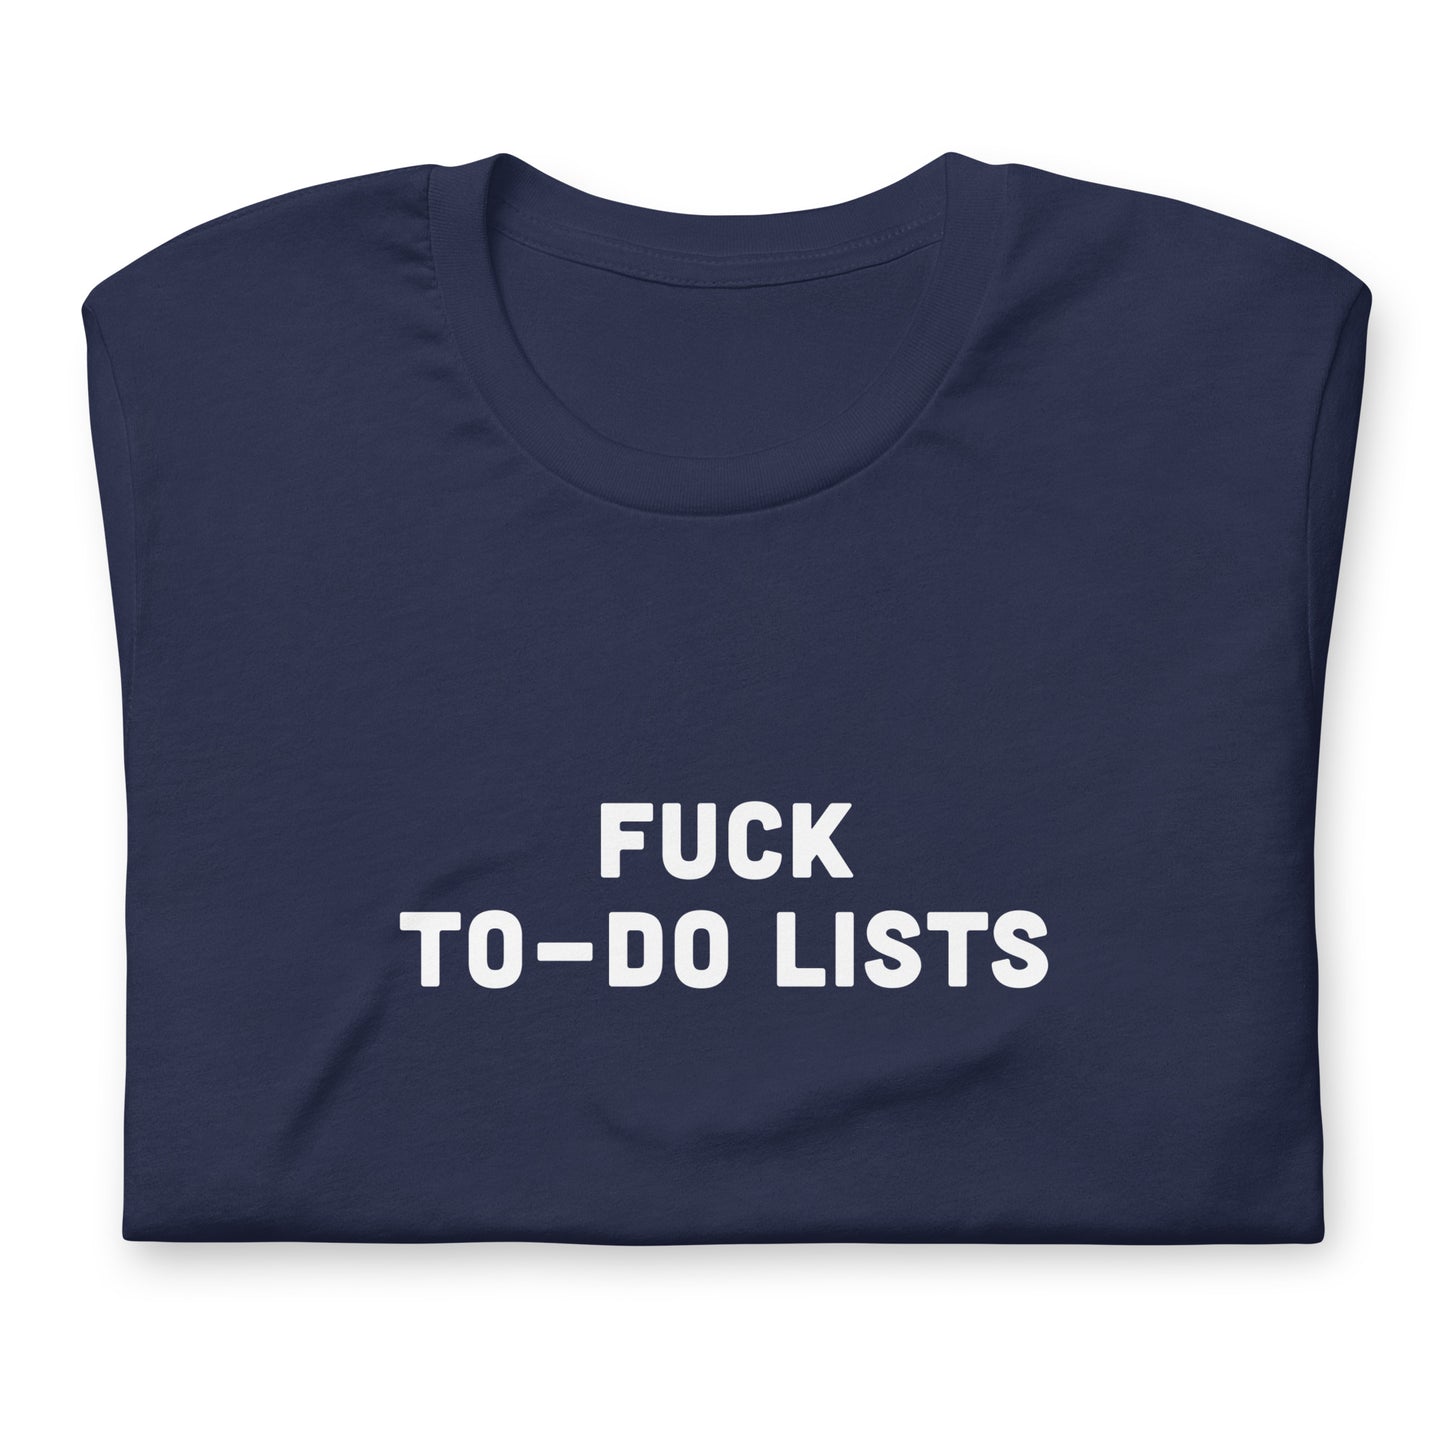 Fuck To Do Lists T-Shirt Size XL Color Black